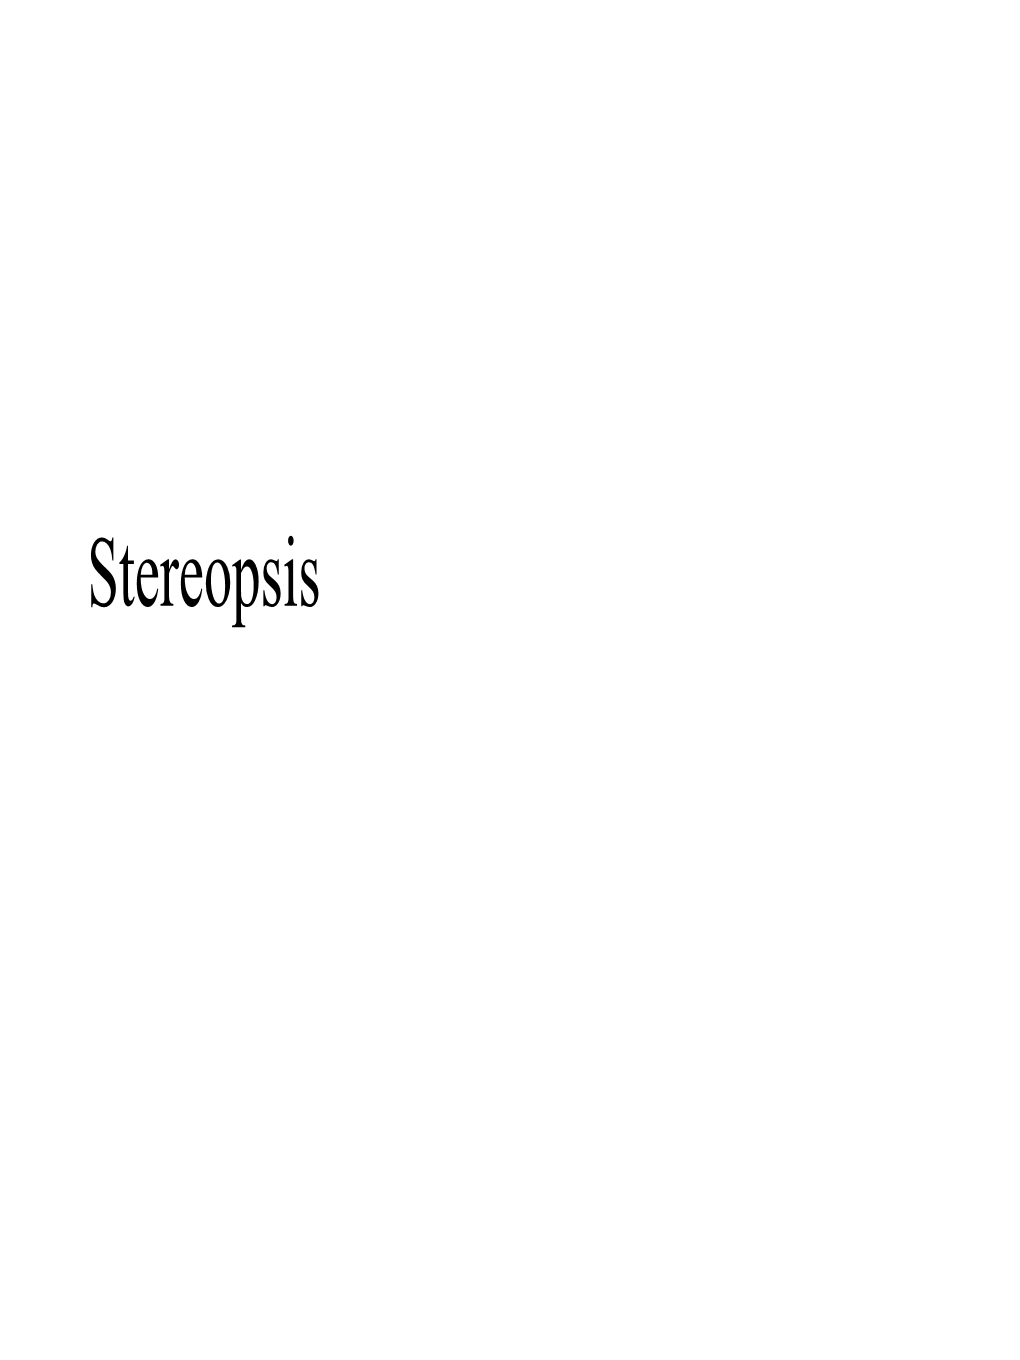 Stereopsis Exam #1 5 Pts "-2.5 Any Computational Error, Error with Units, Etc"